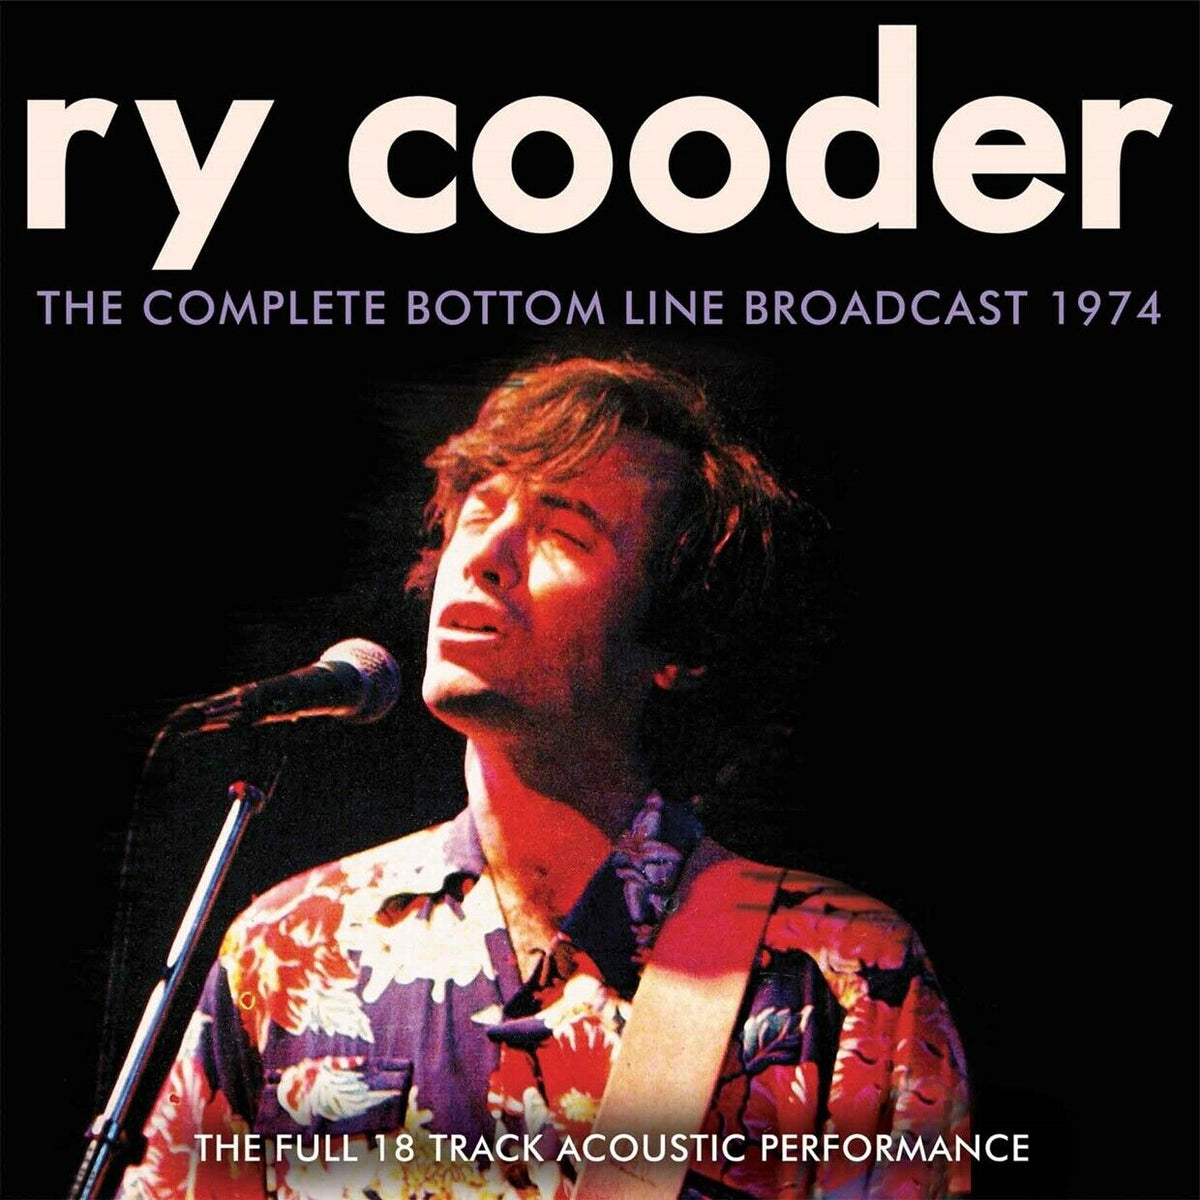 Ry Cooder - The Complete Bottom Line Broadcast 1974 - CD